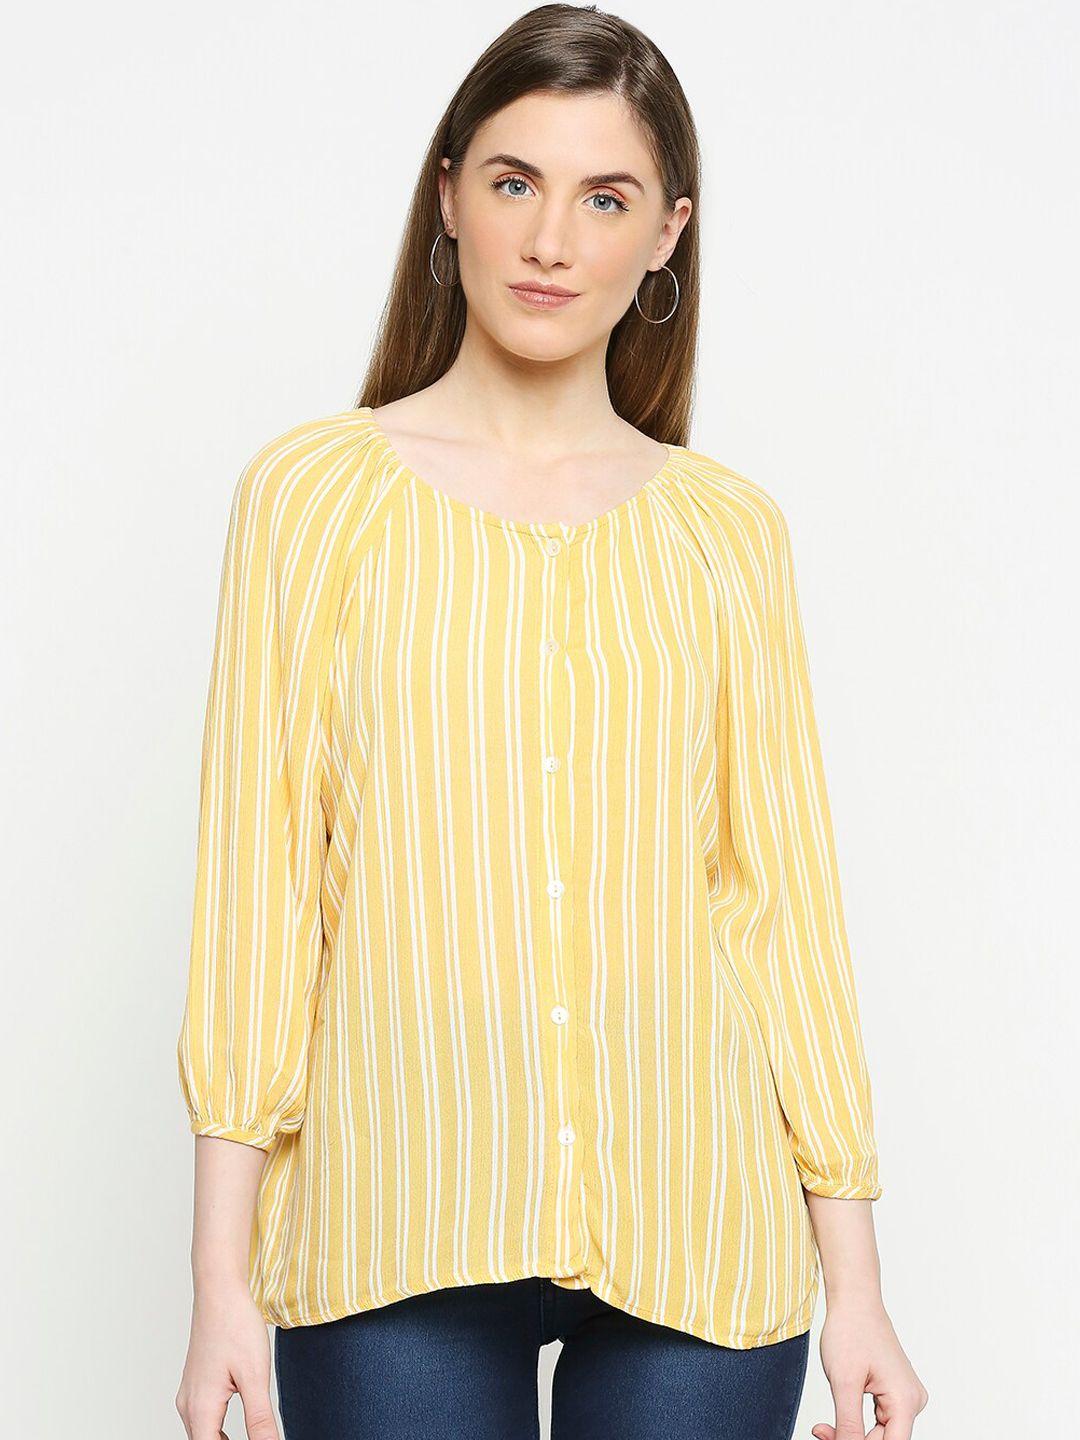 honey by pantaloons yellow & white striped puff sleeves top